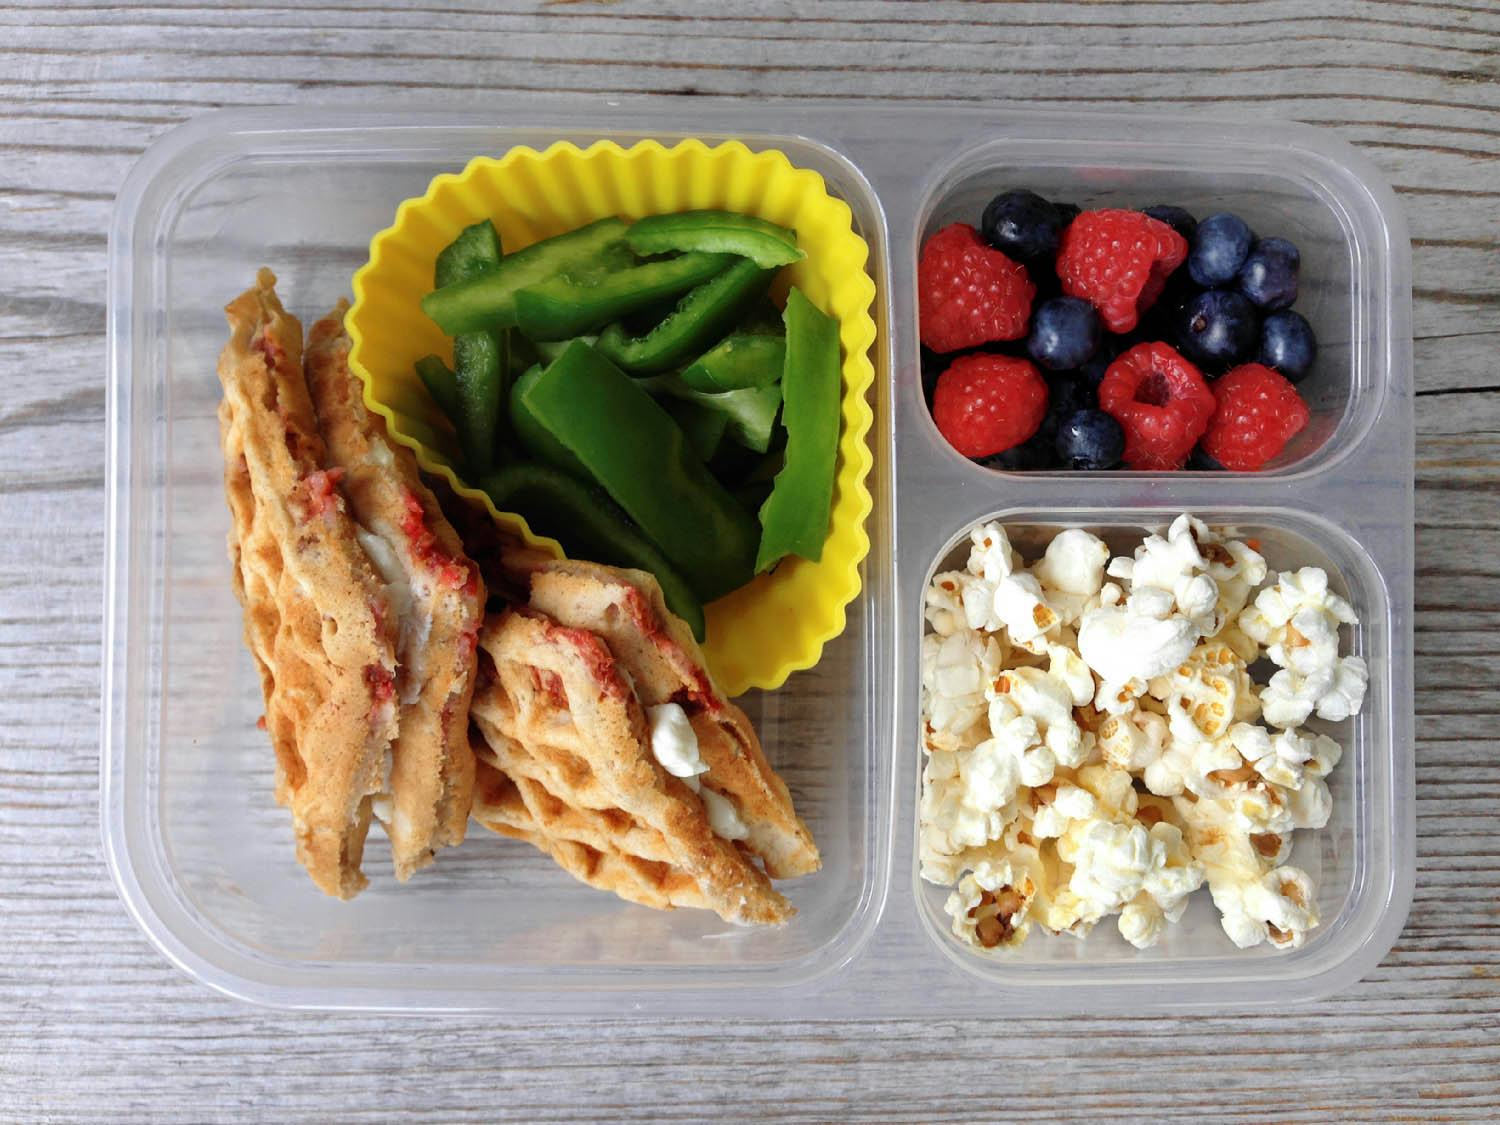 Pack Wholesome School Lunches This Fall